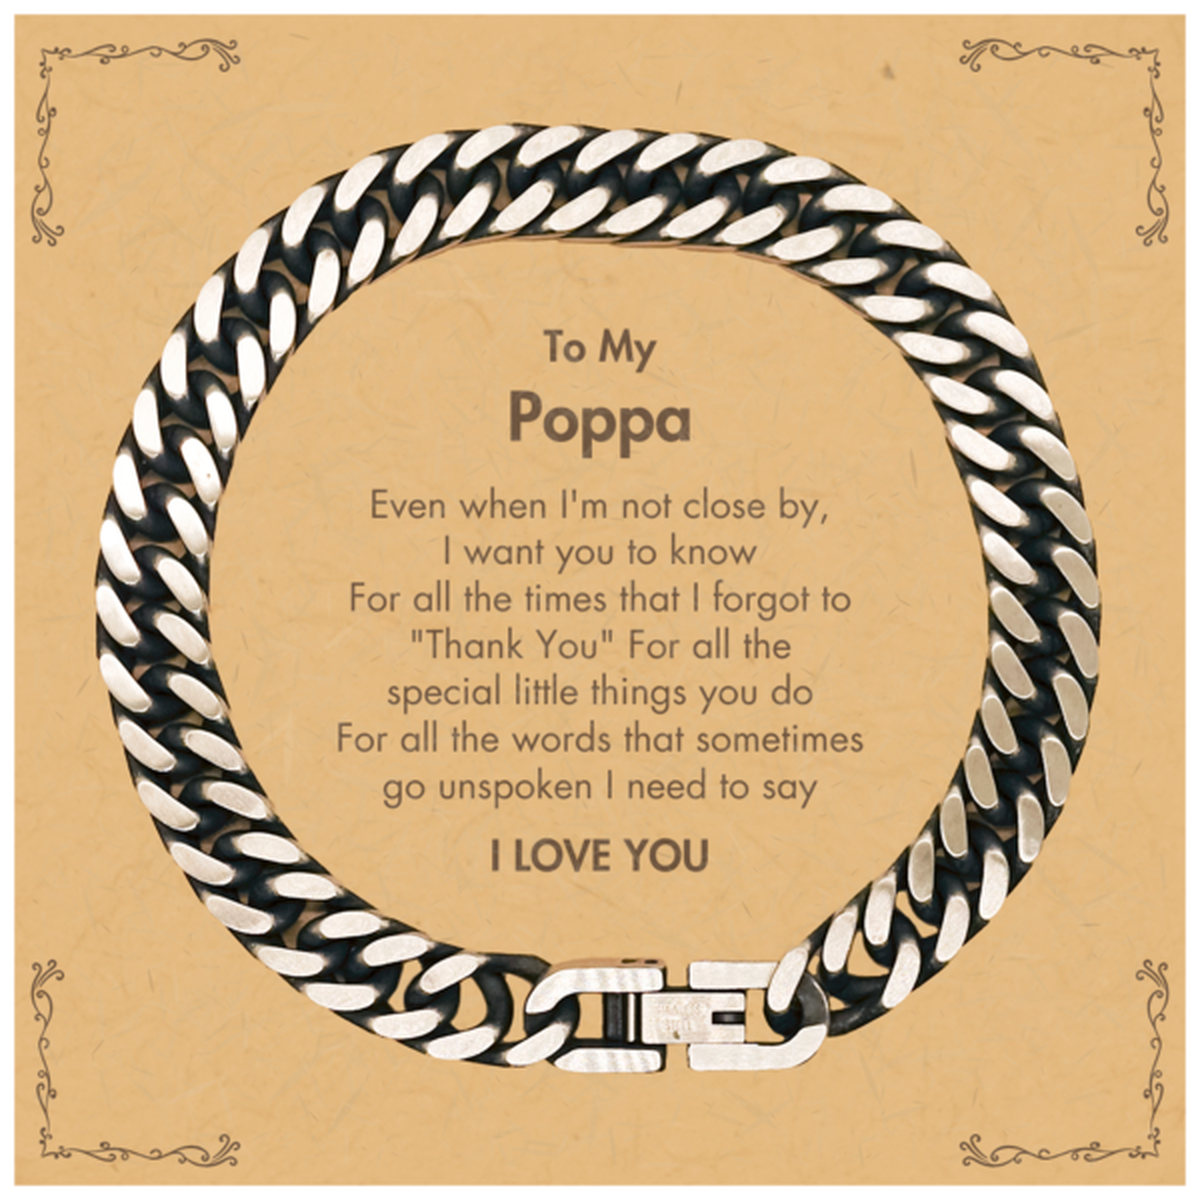 Thank You Gifts for Poppa, Keepsake Cuban Link Chain Bracelet Gifts for Poppa Birthday Mother's day Father's Day Poppa For all the words That sometimes go unspoken I need to say I LOVE YOU